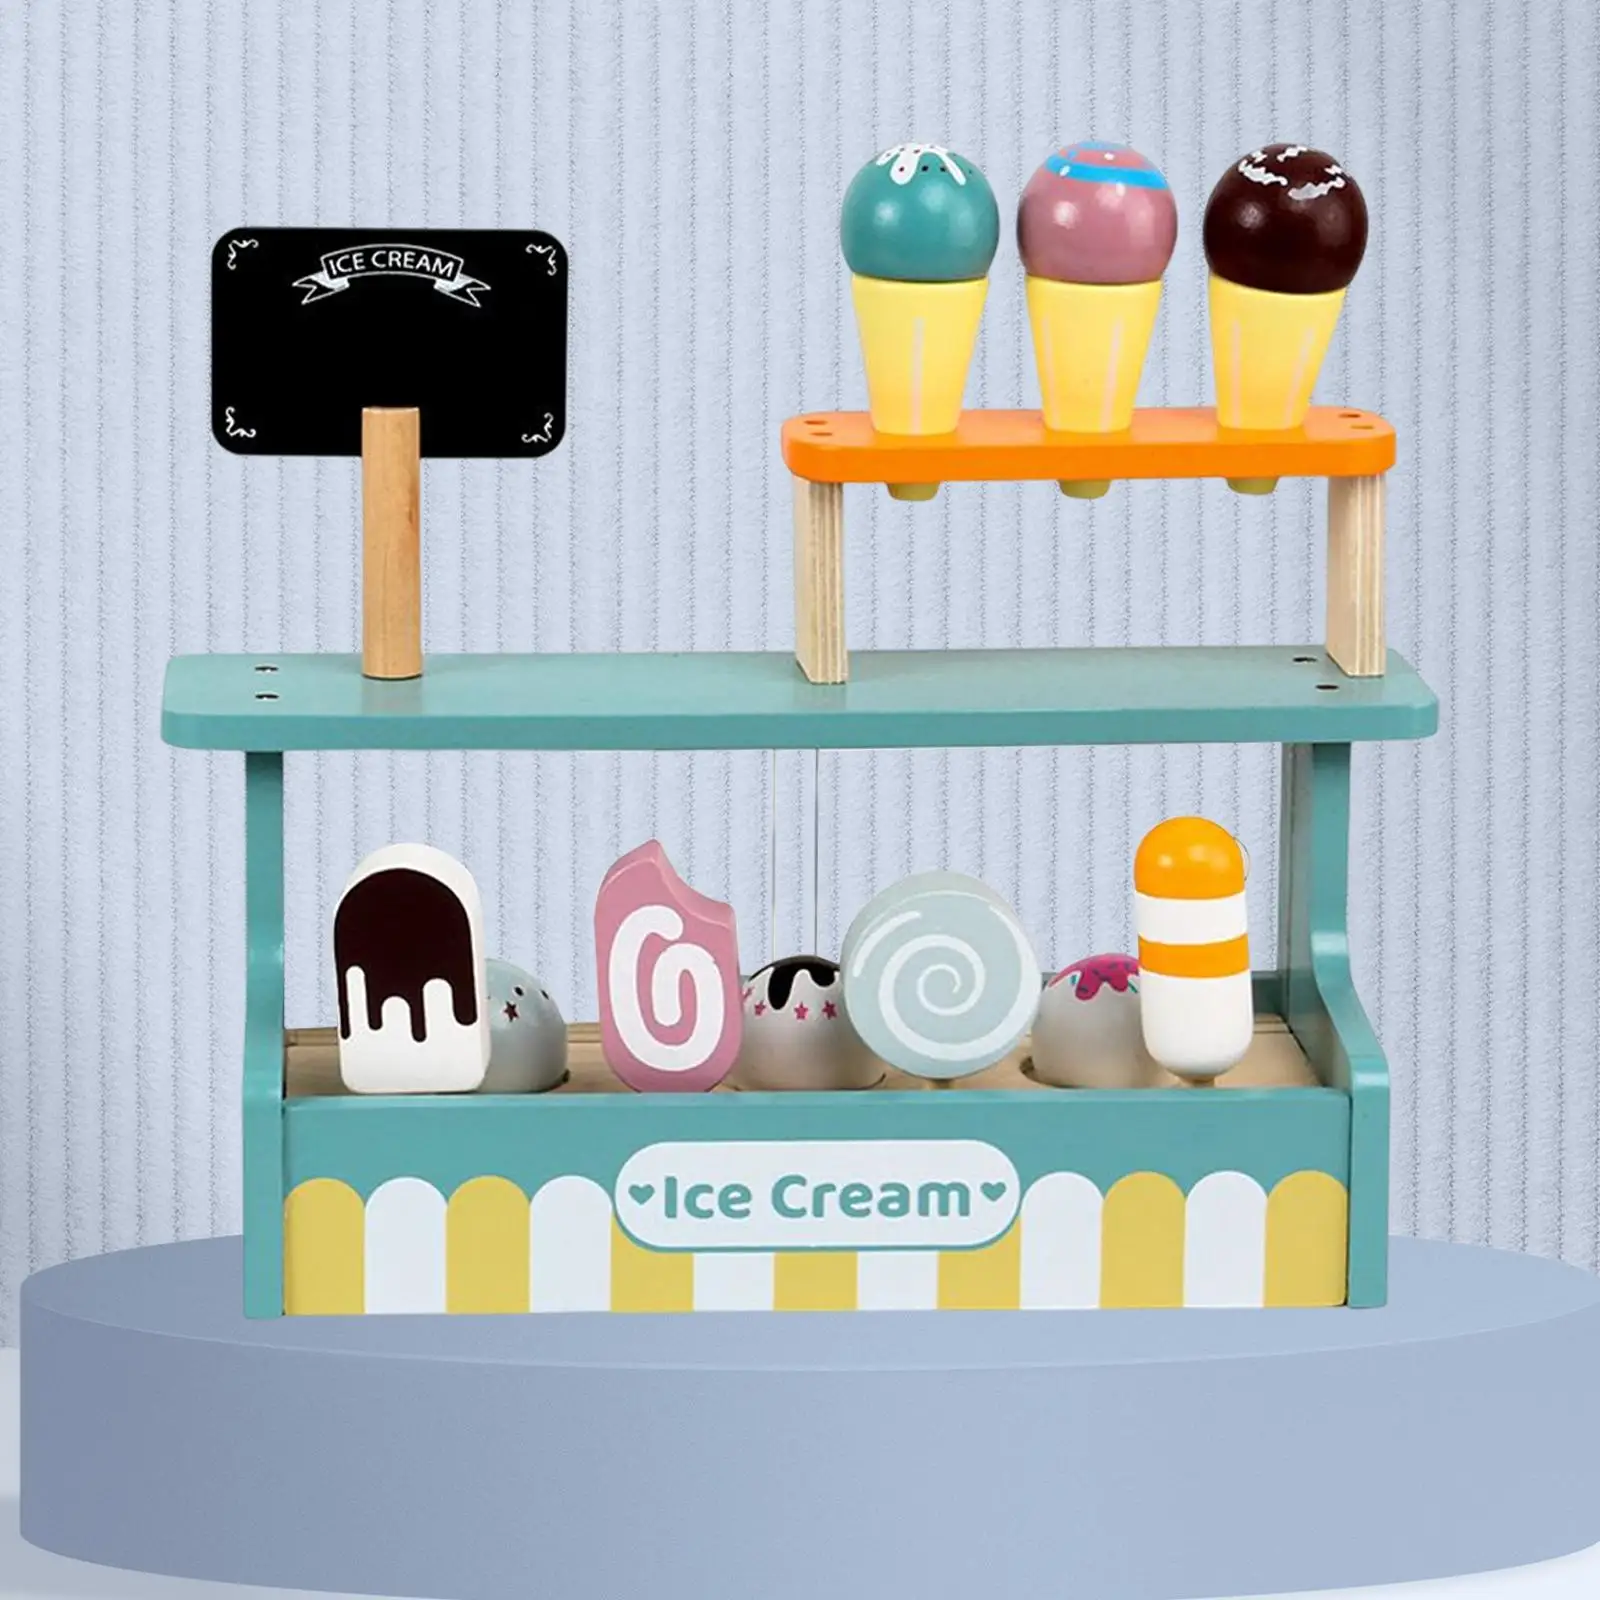 Ice Cream Playset Scene Model Educational Toys Gifts for Parties Holiday